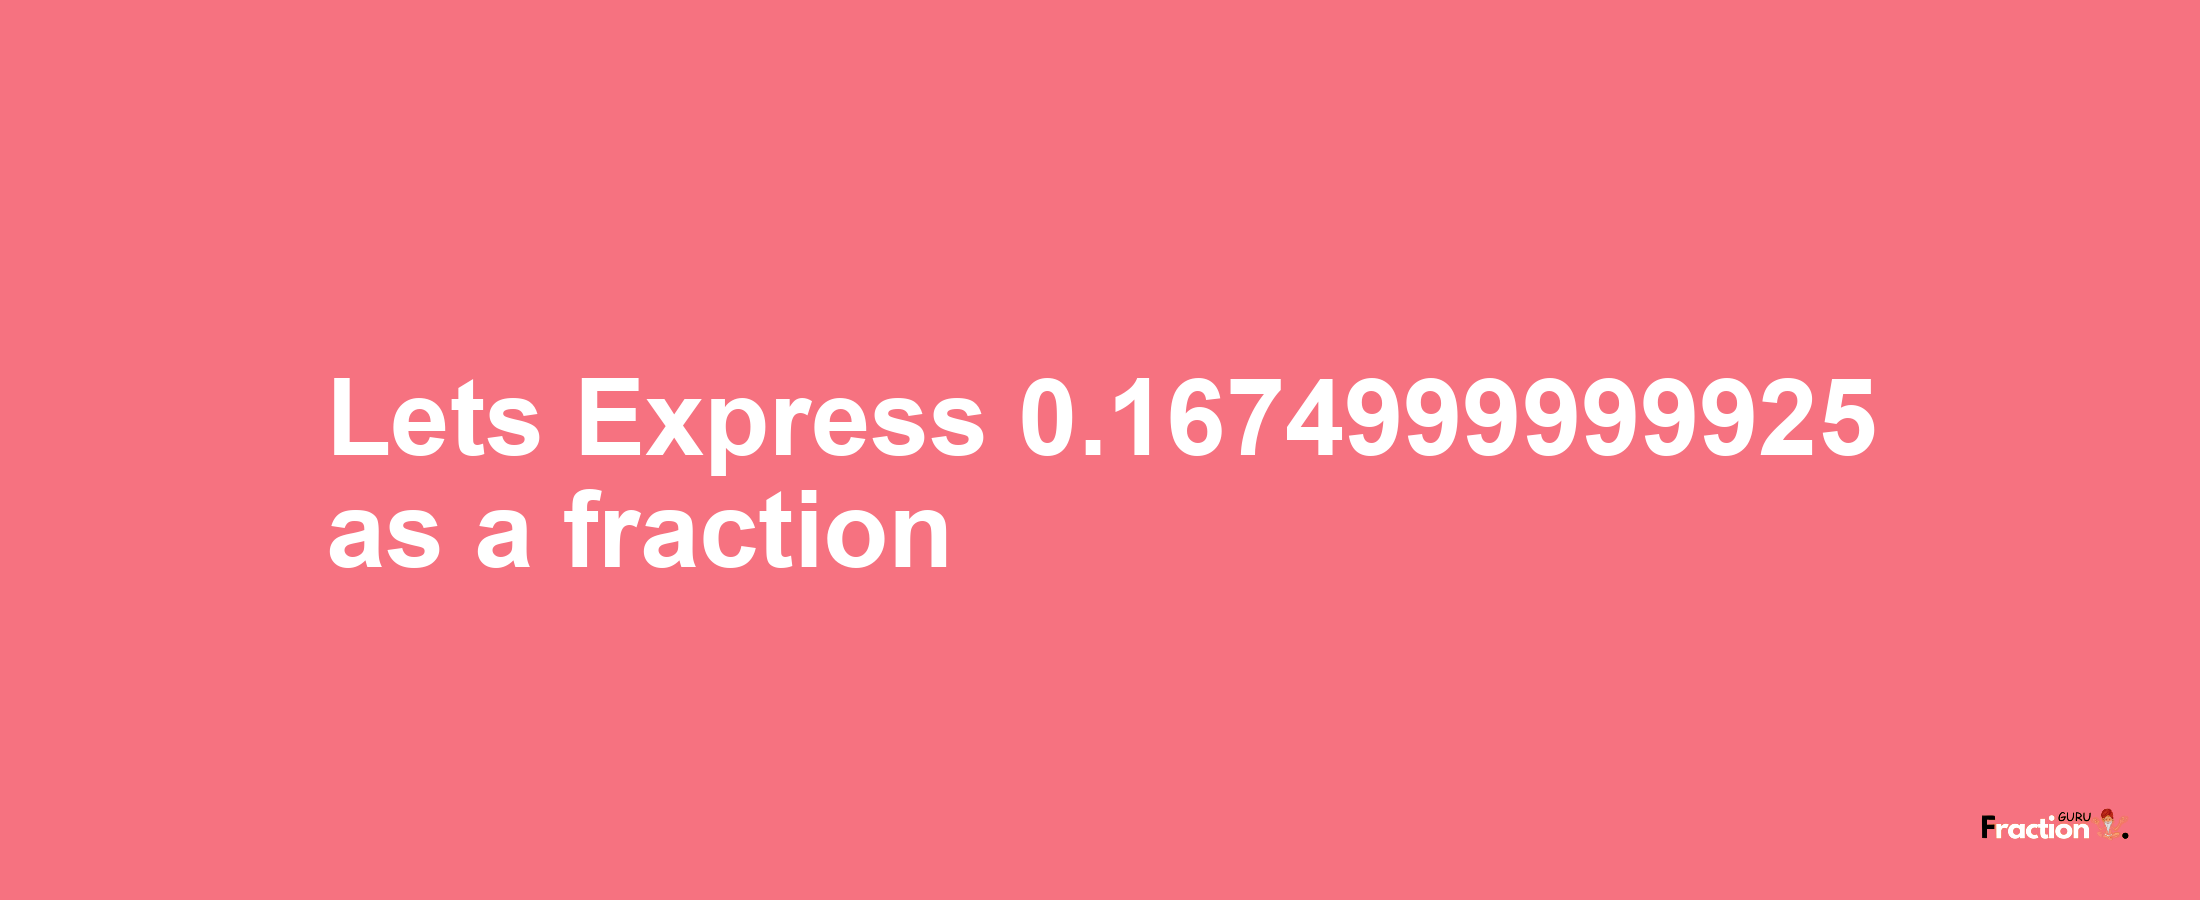 Lets Express 0.1674999999925 as afraction